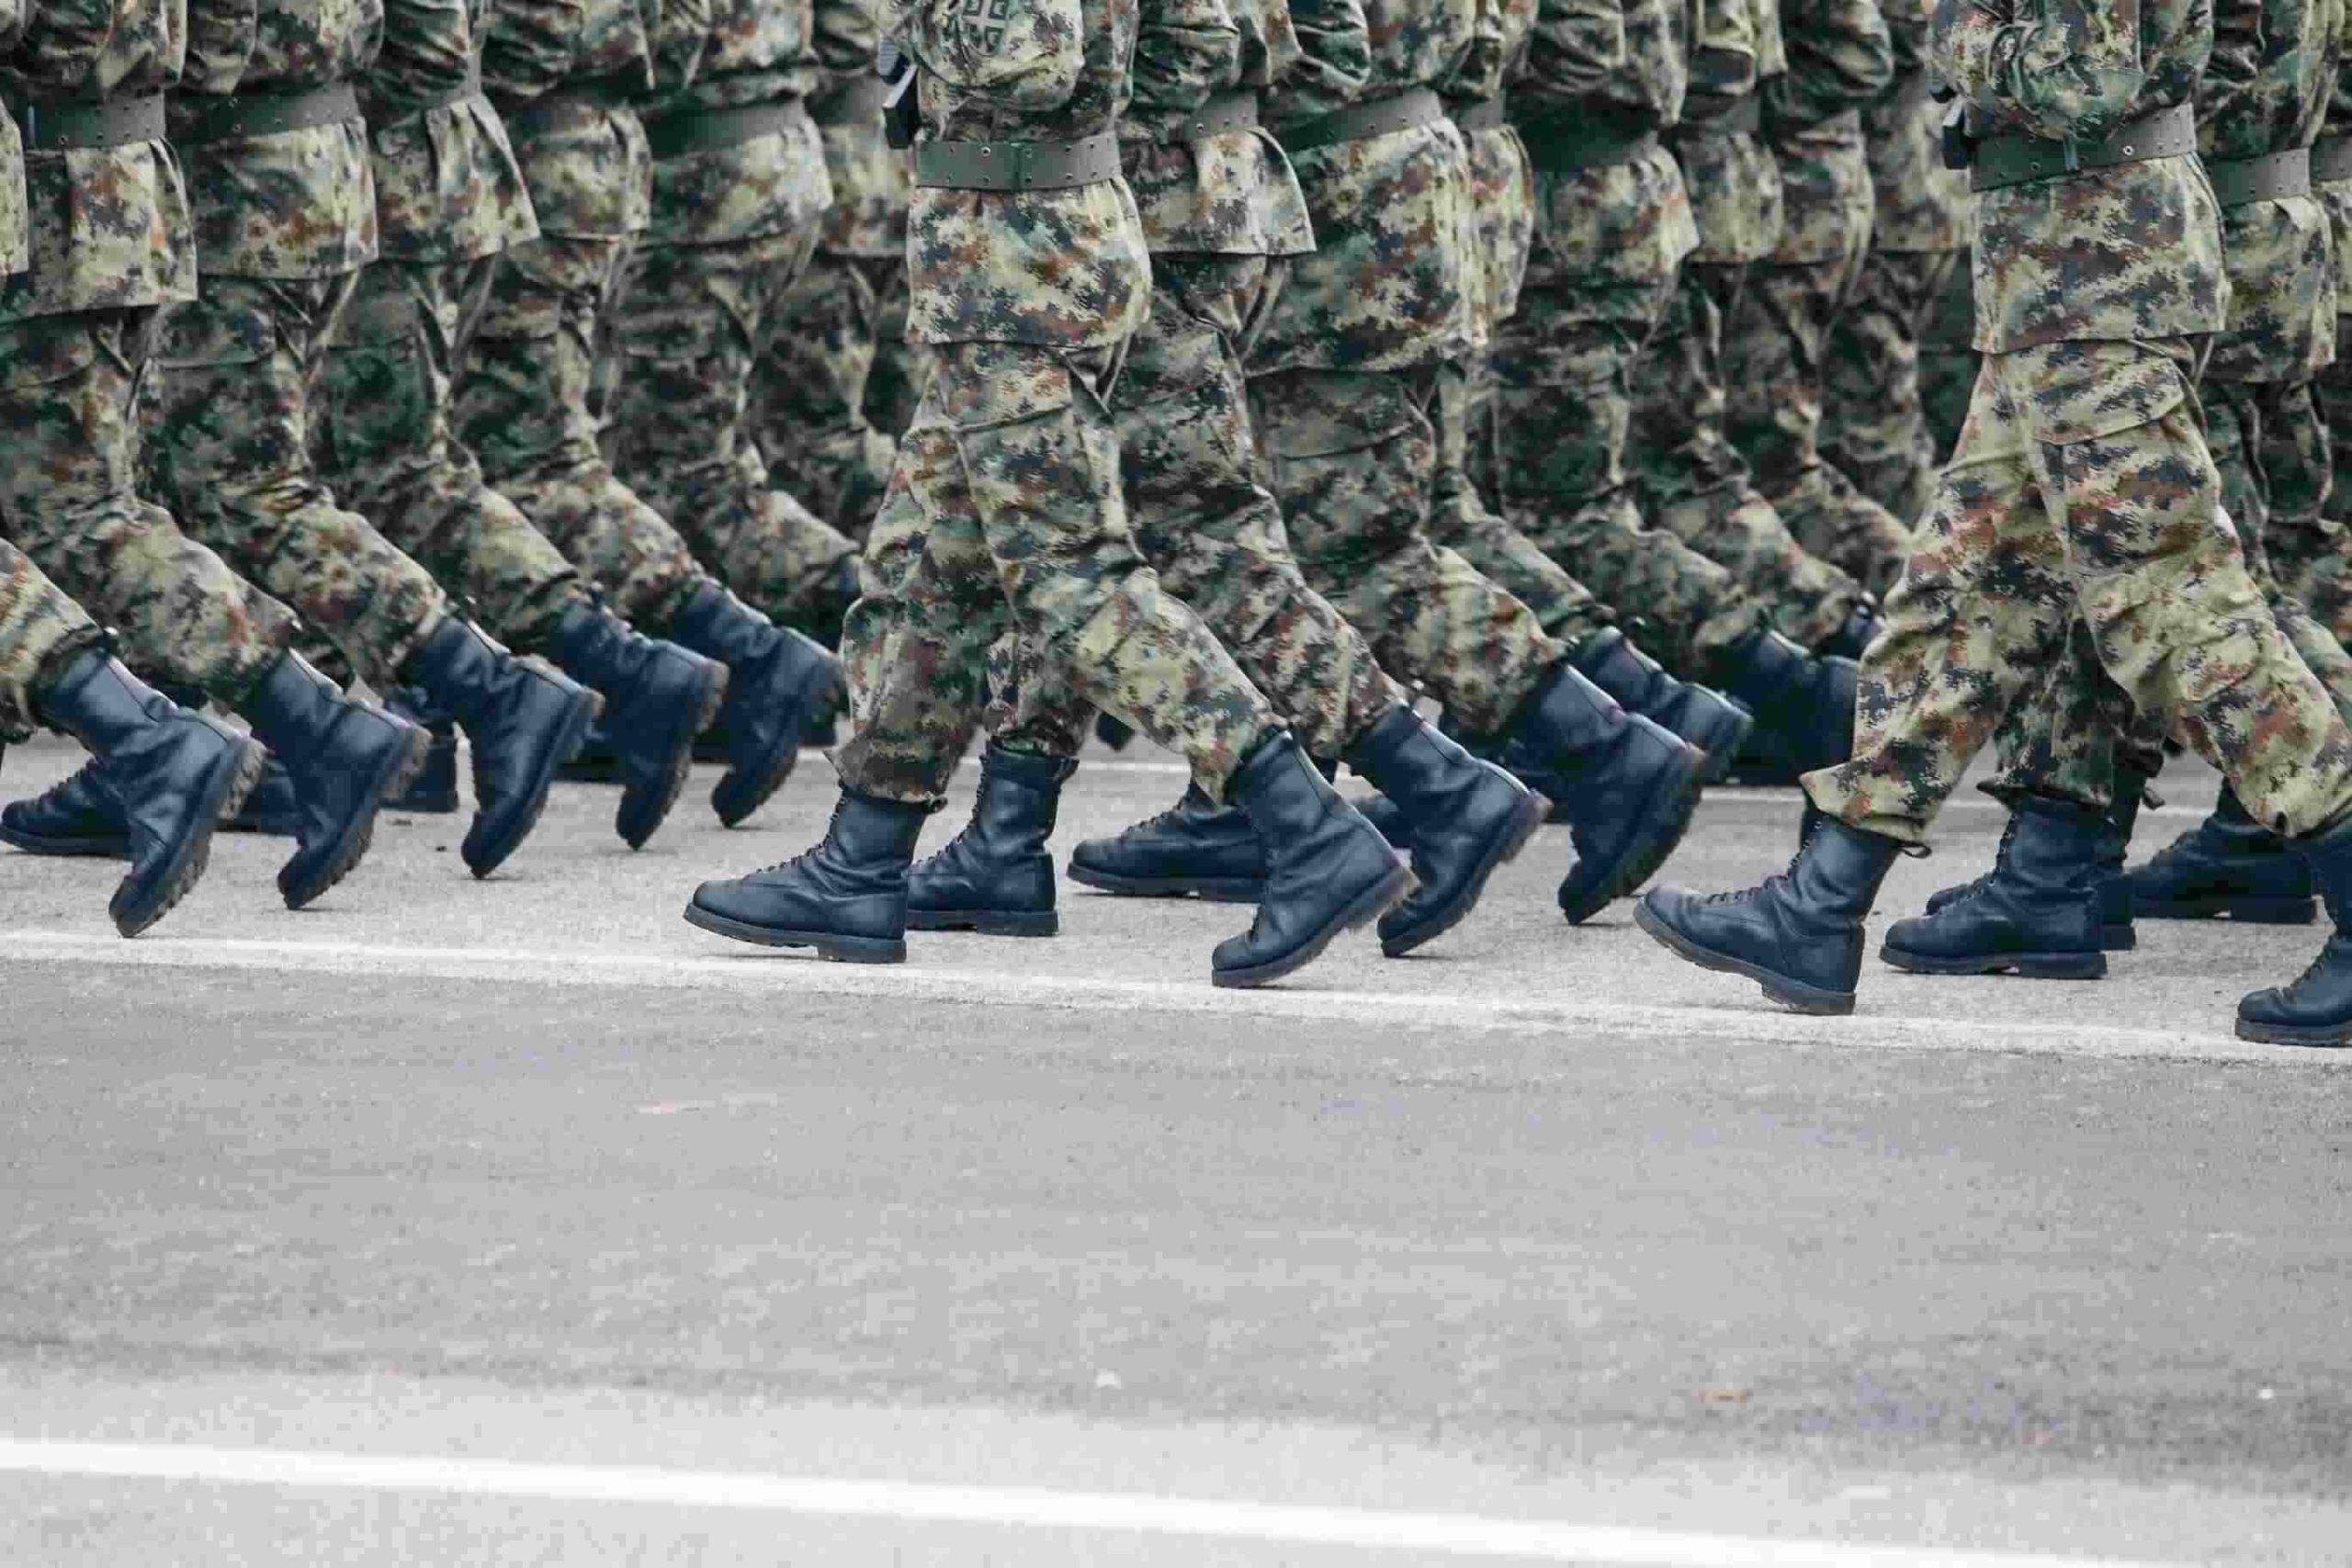   
																Report: Students Mandated Or Heavily-Steered To JROTC Classes 
															 